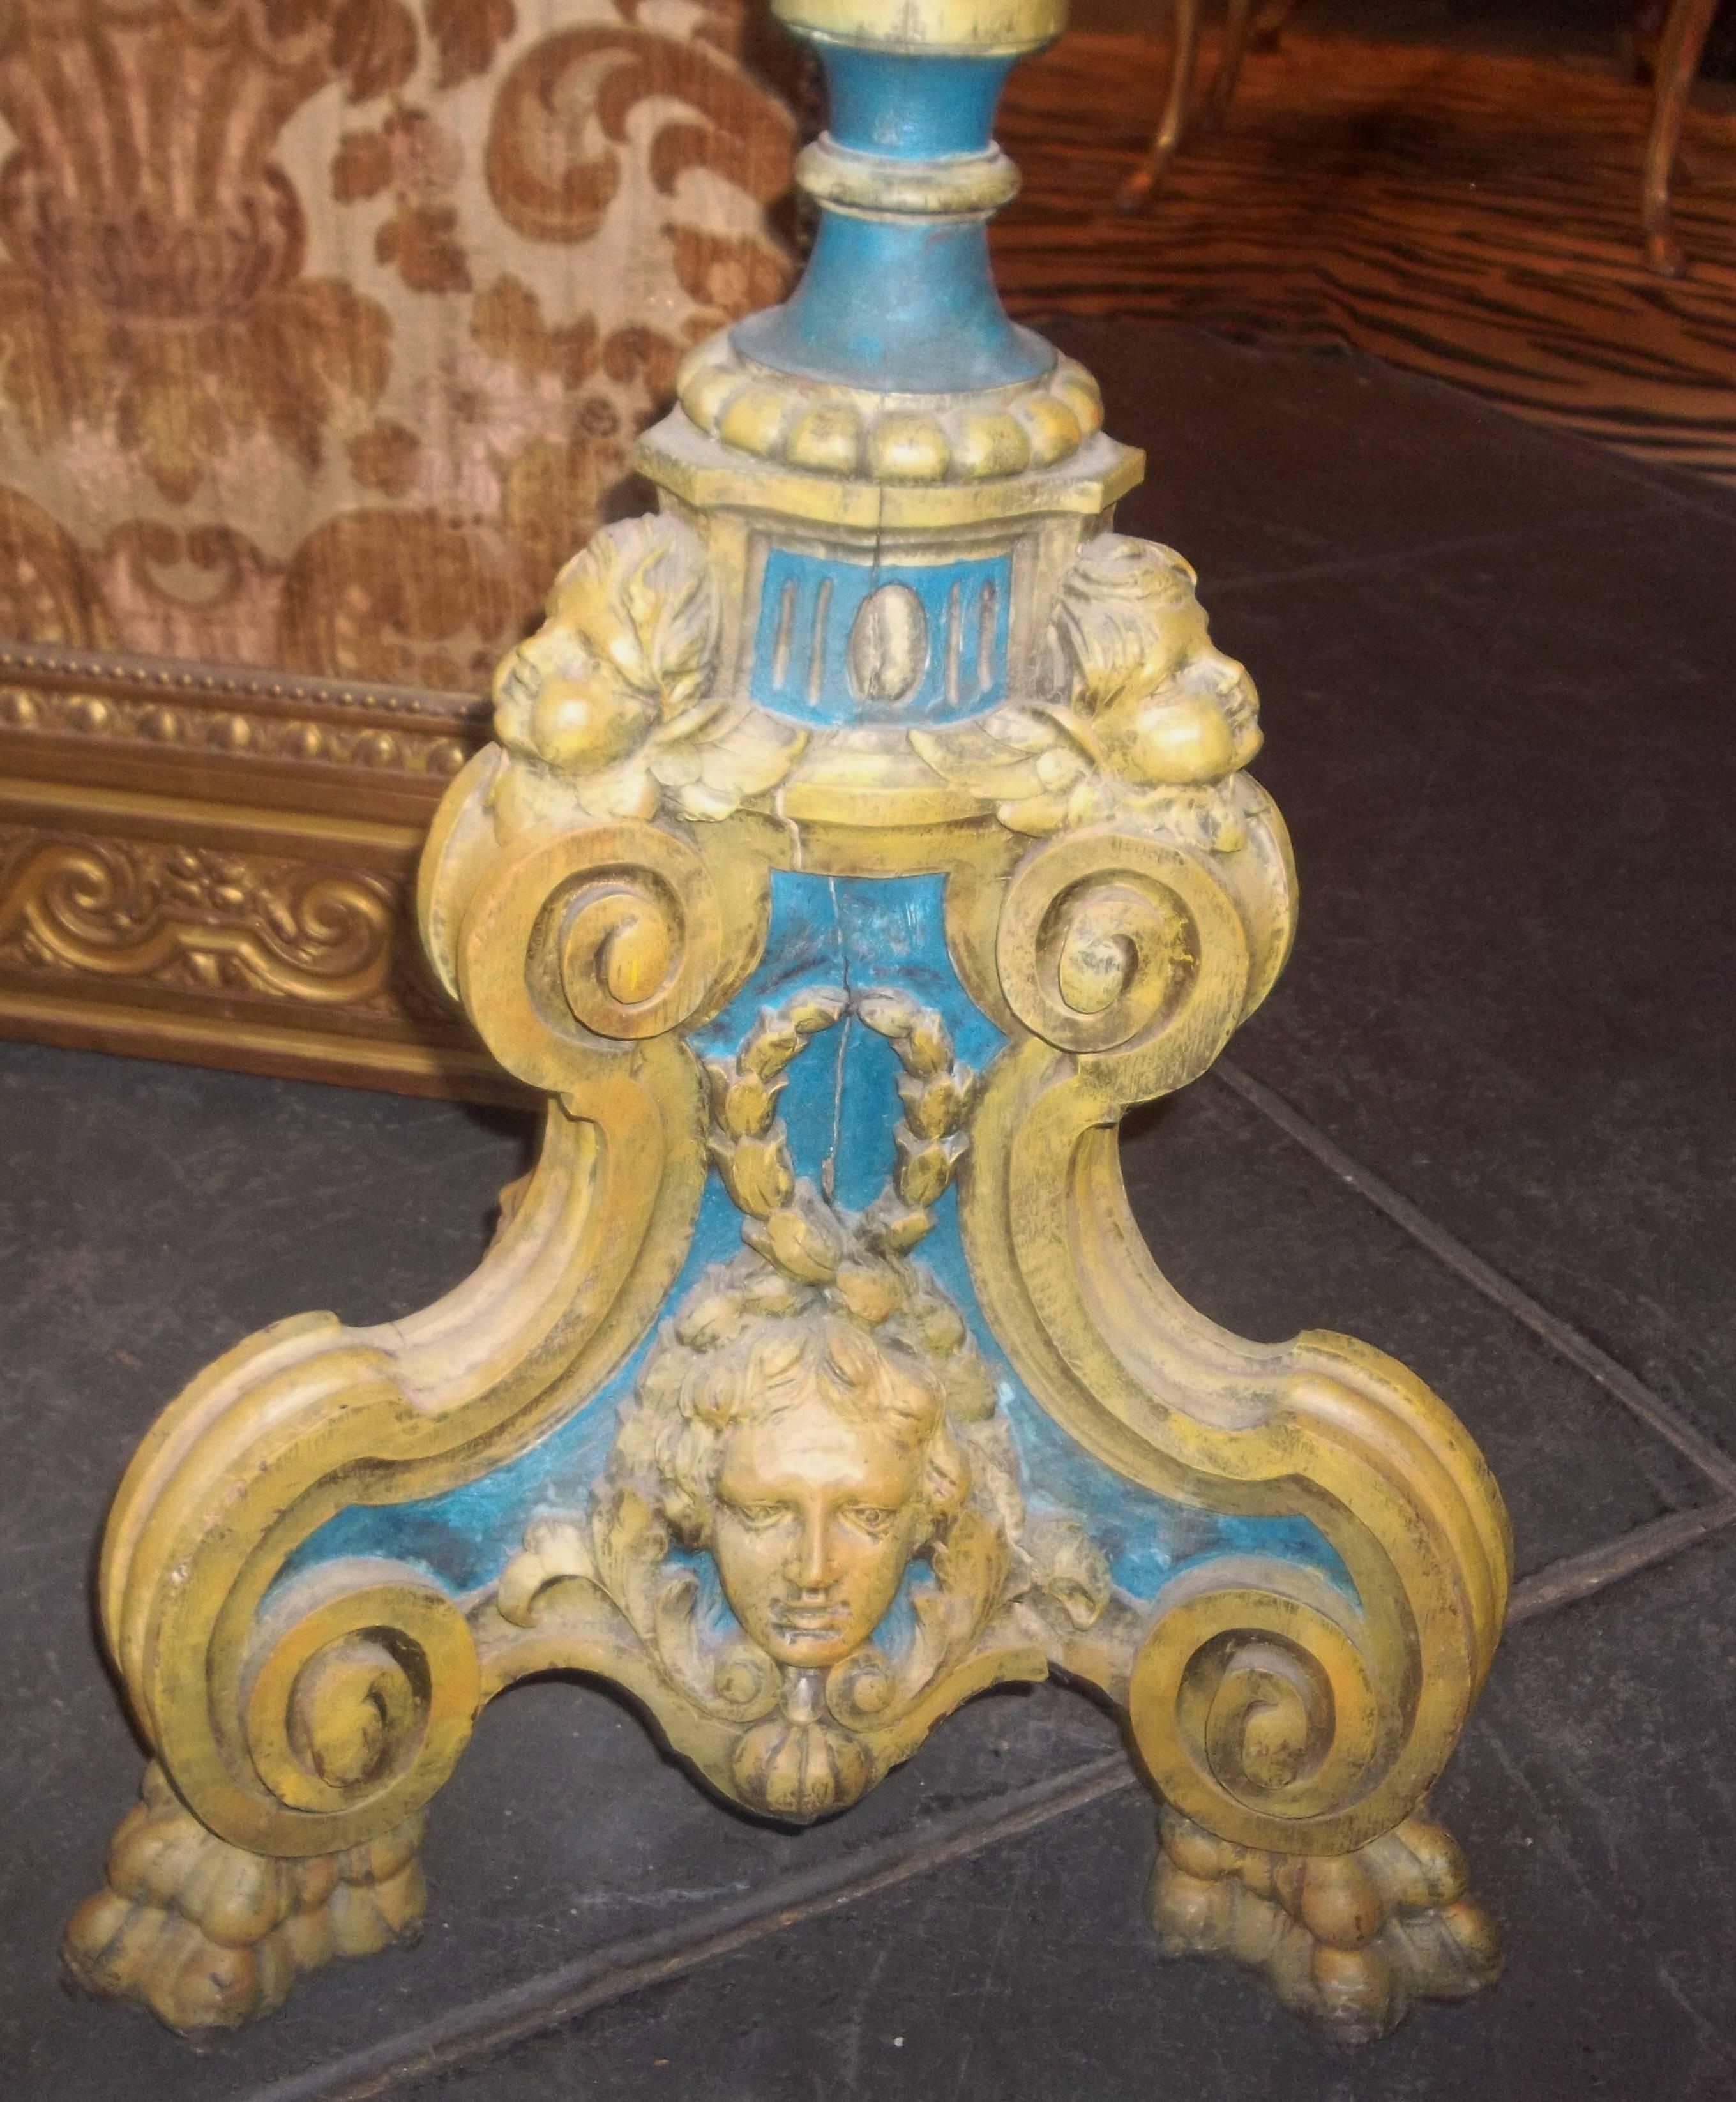 Putti (or cherubs,) floral garlands and fluted shafts. Each five lights. The bottom bases hand chiseled single chunks of wood. 

Blue and yellow paint.

Possibly French . Baroque to Rococo transitional style.

With usual wear, dents, dings, nicks